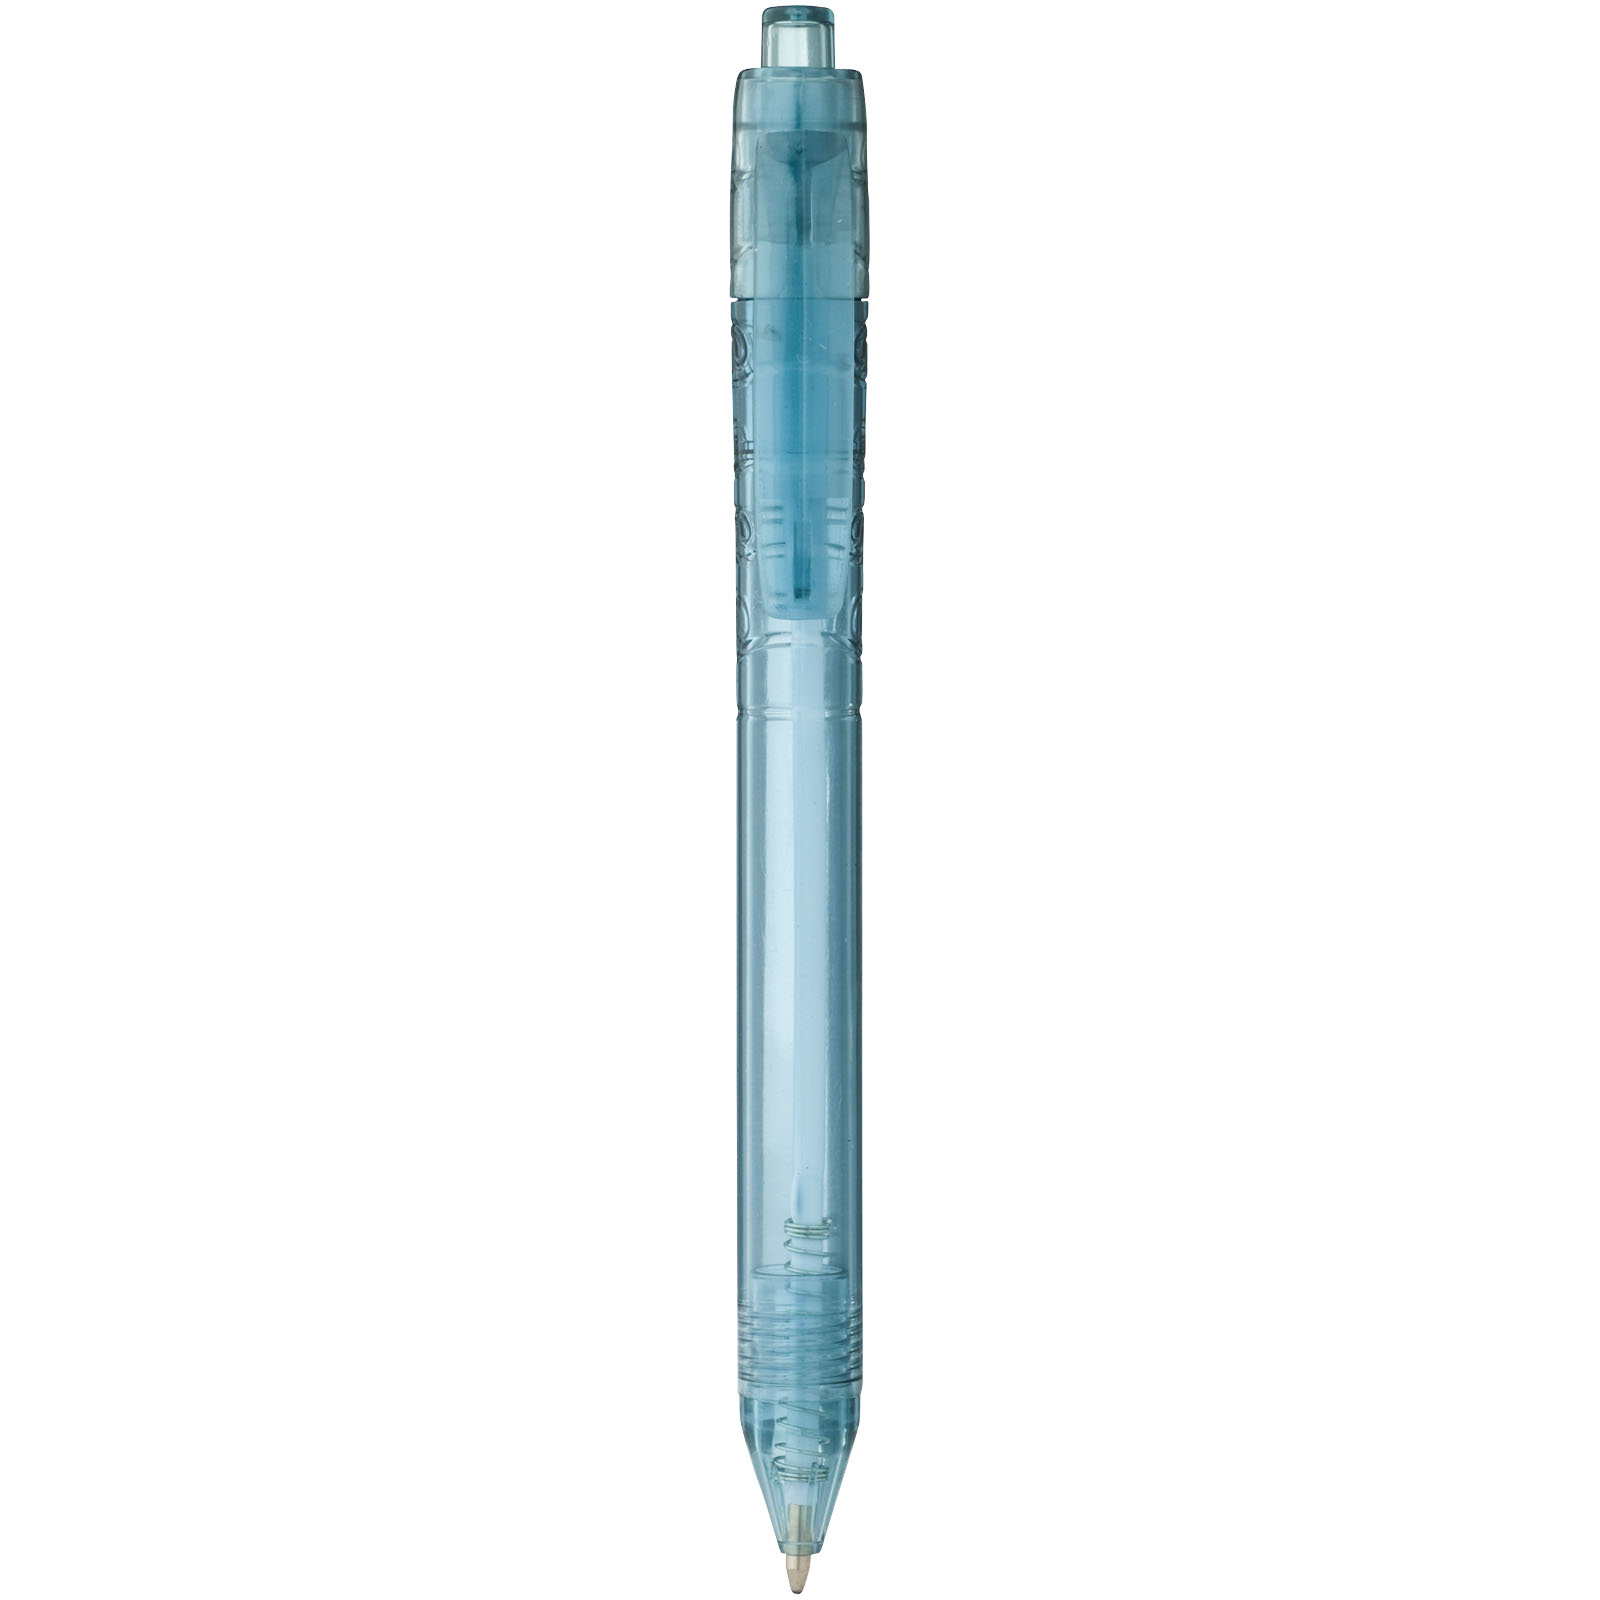 This is a ballpoint pen made from recycled PET, a type of plastic, in Vancouver. - Erith